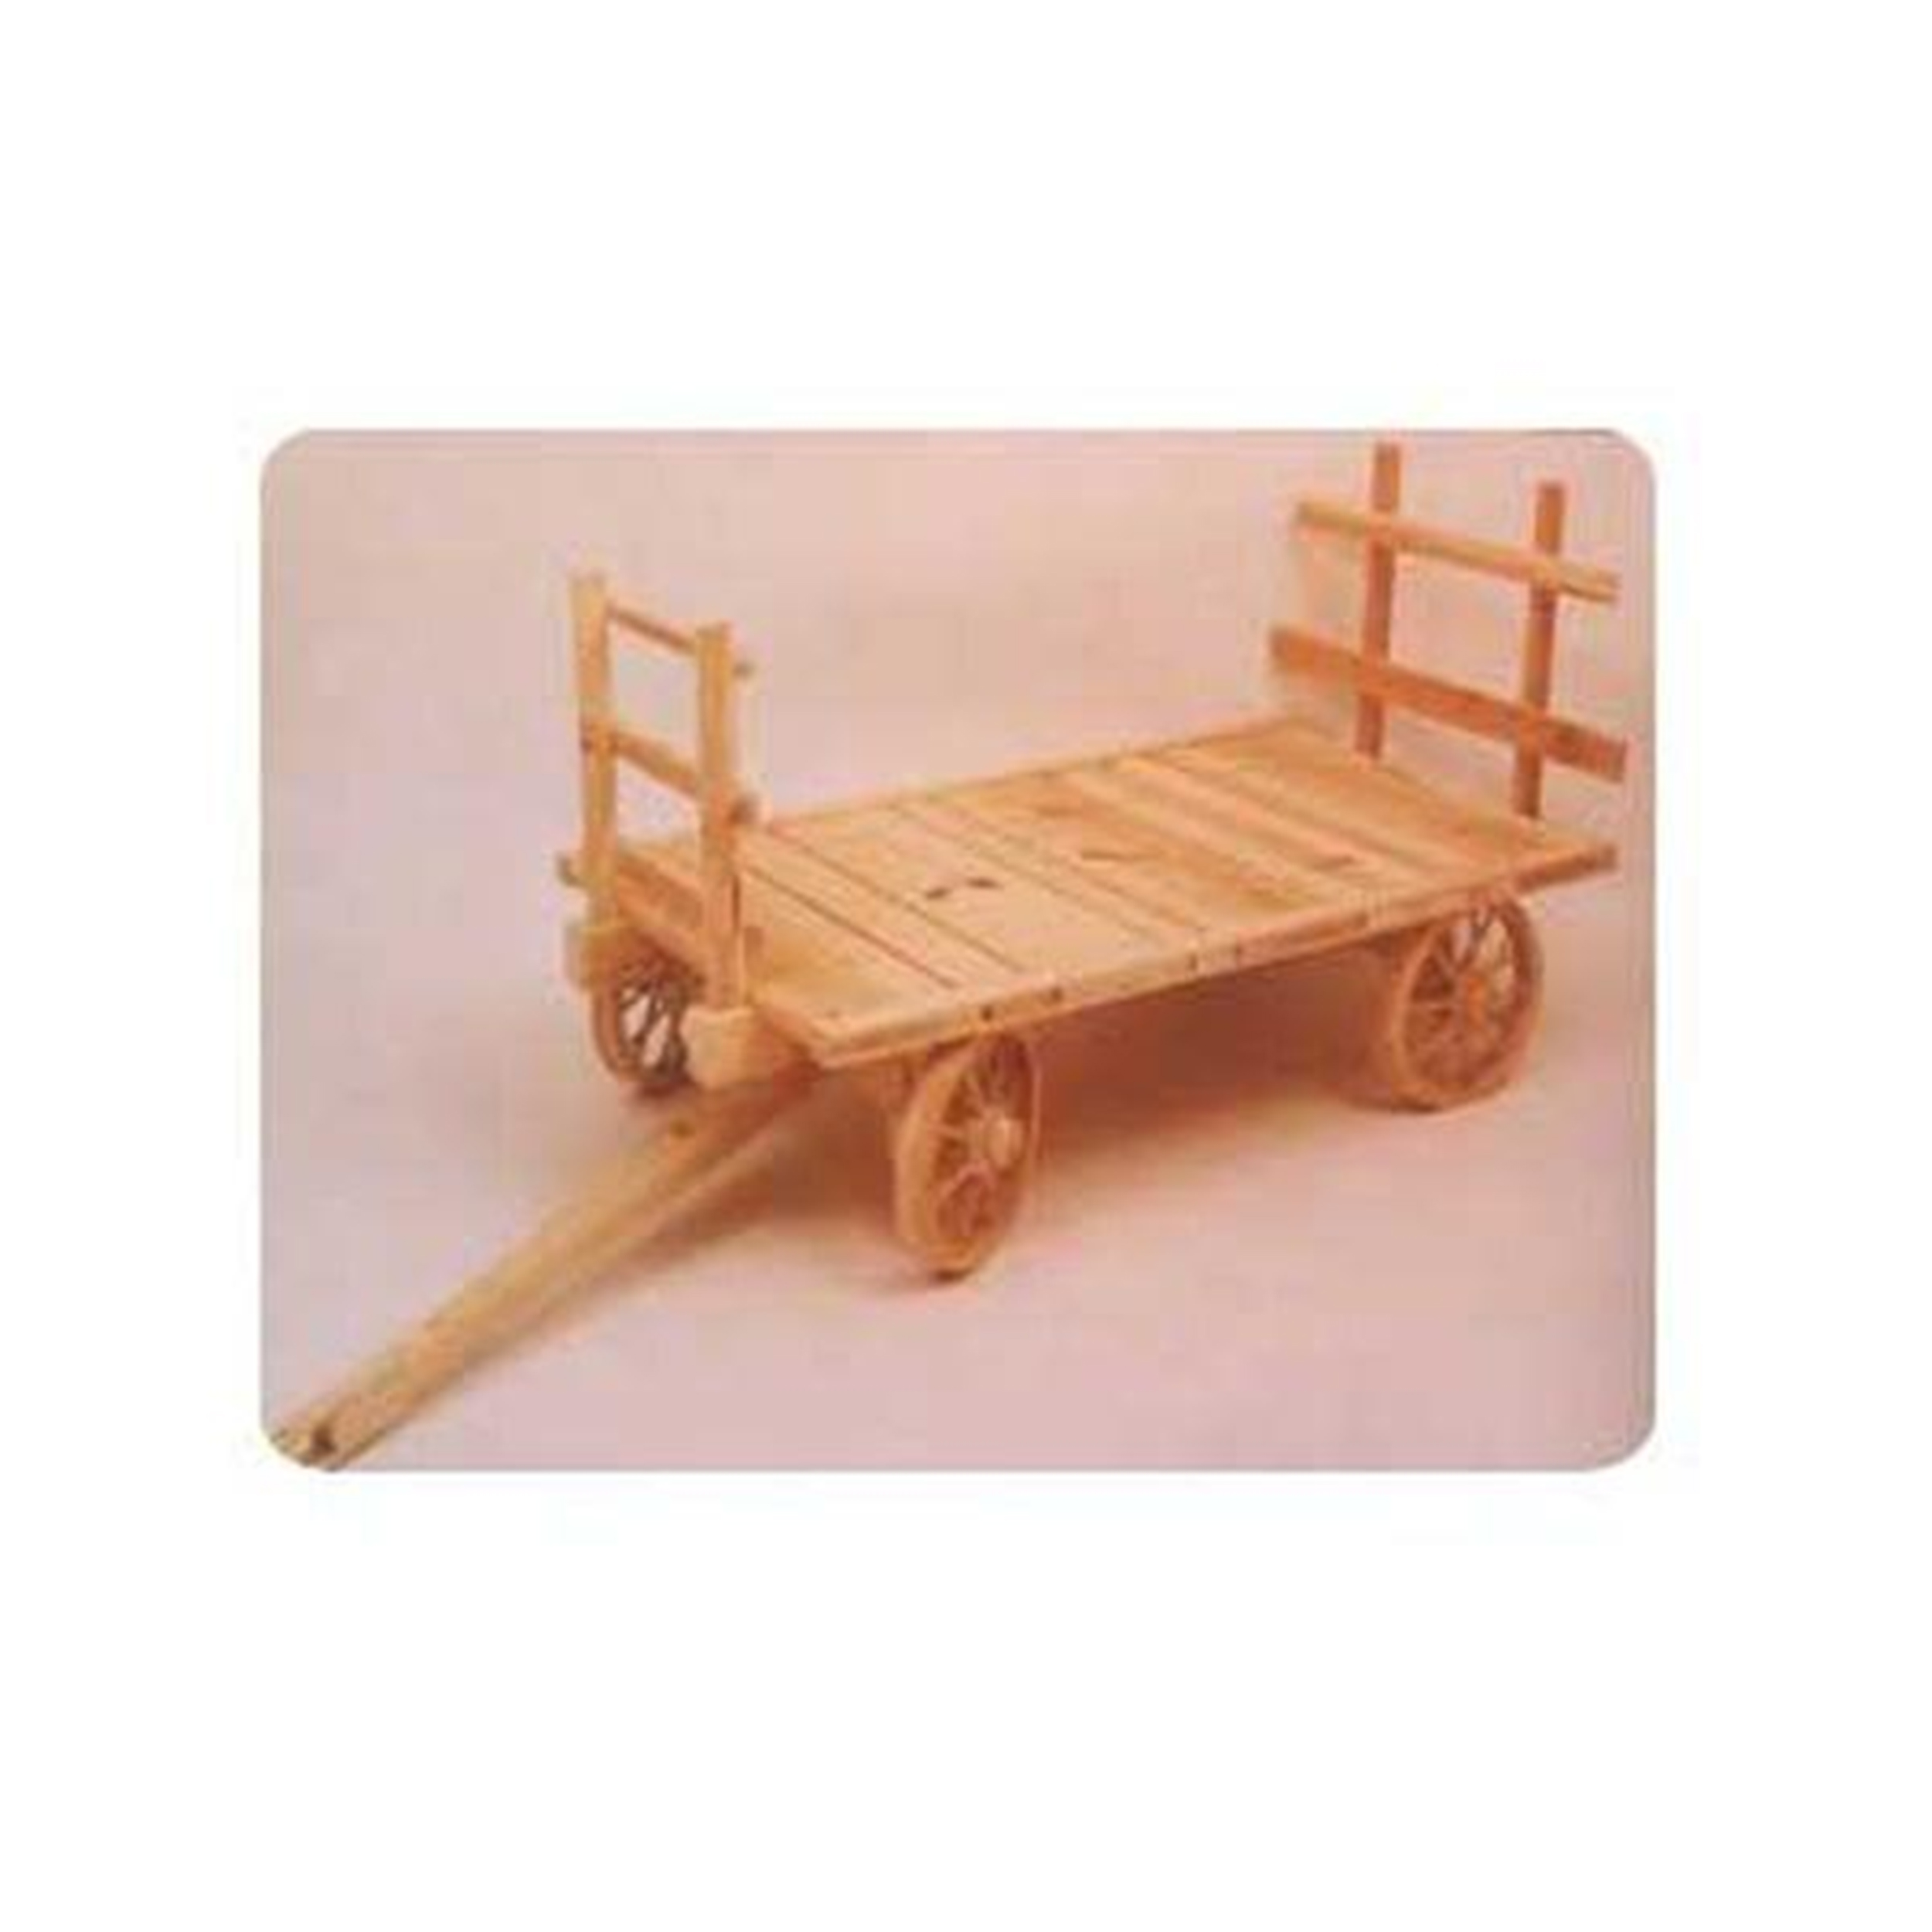 Woodworking Project Paper Plan To Build Hay Wagon